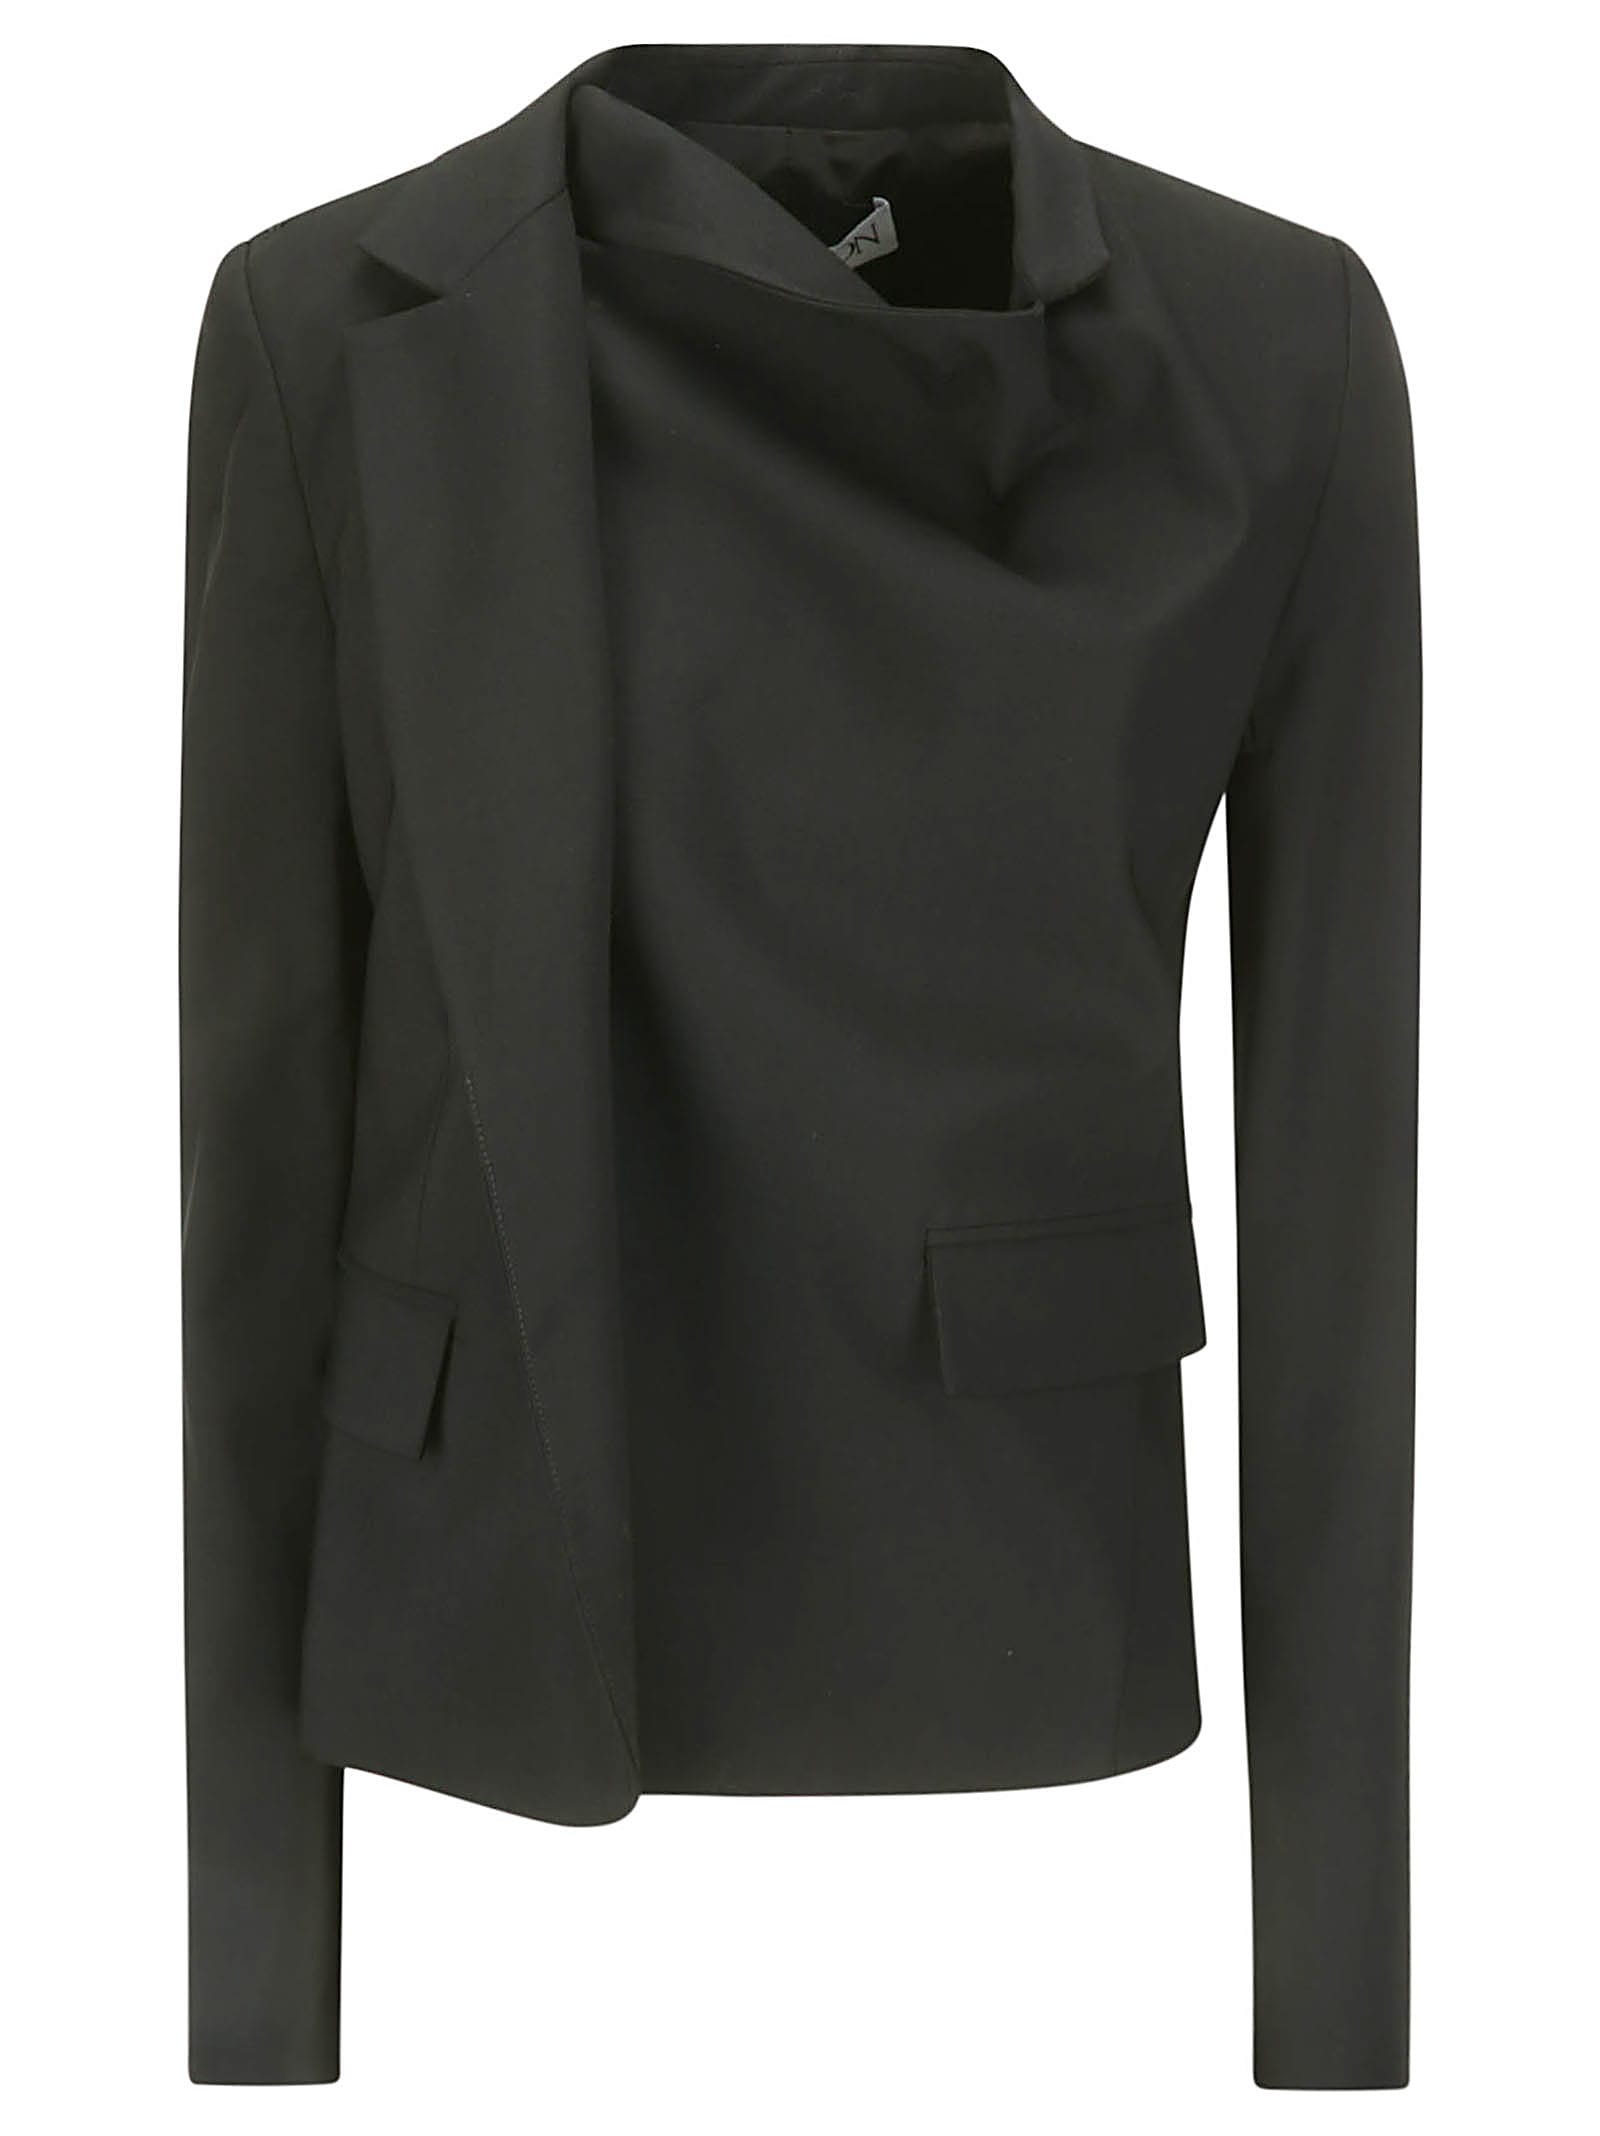 JW ANDERSON DRAPED TAILORED JACKET